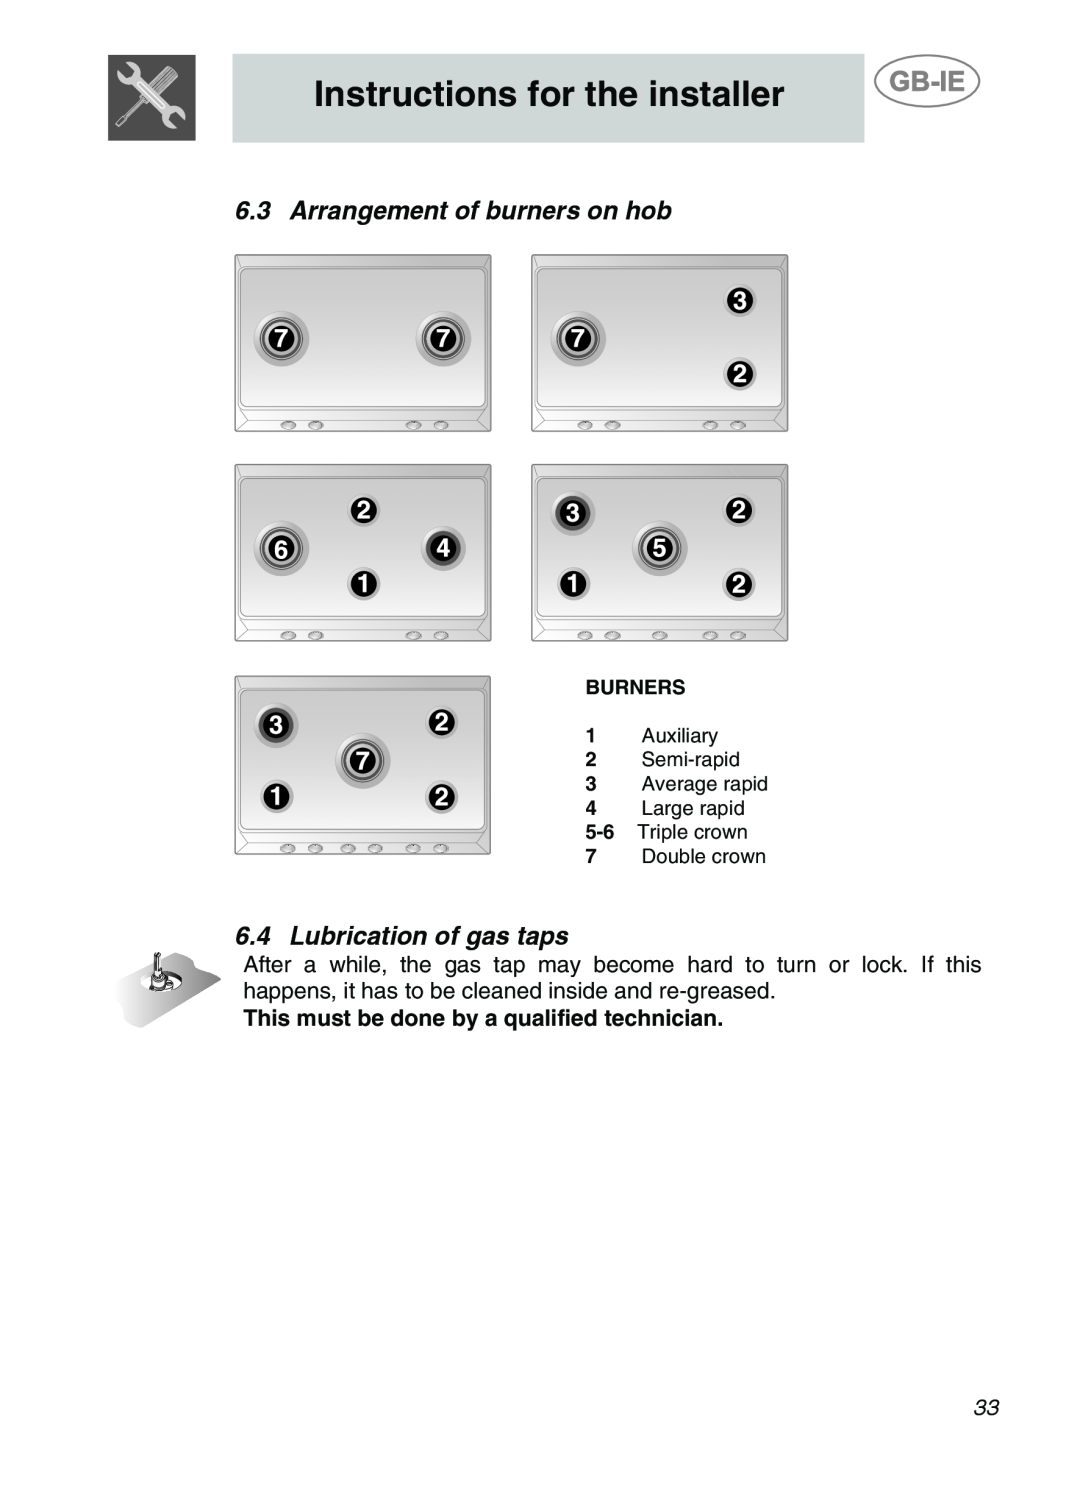 Smeg AP704S3 Arrangement of burners on hob, Lubrication of gas taps, Instructions for the installer, Burners, Auxiliary 